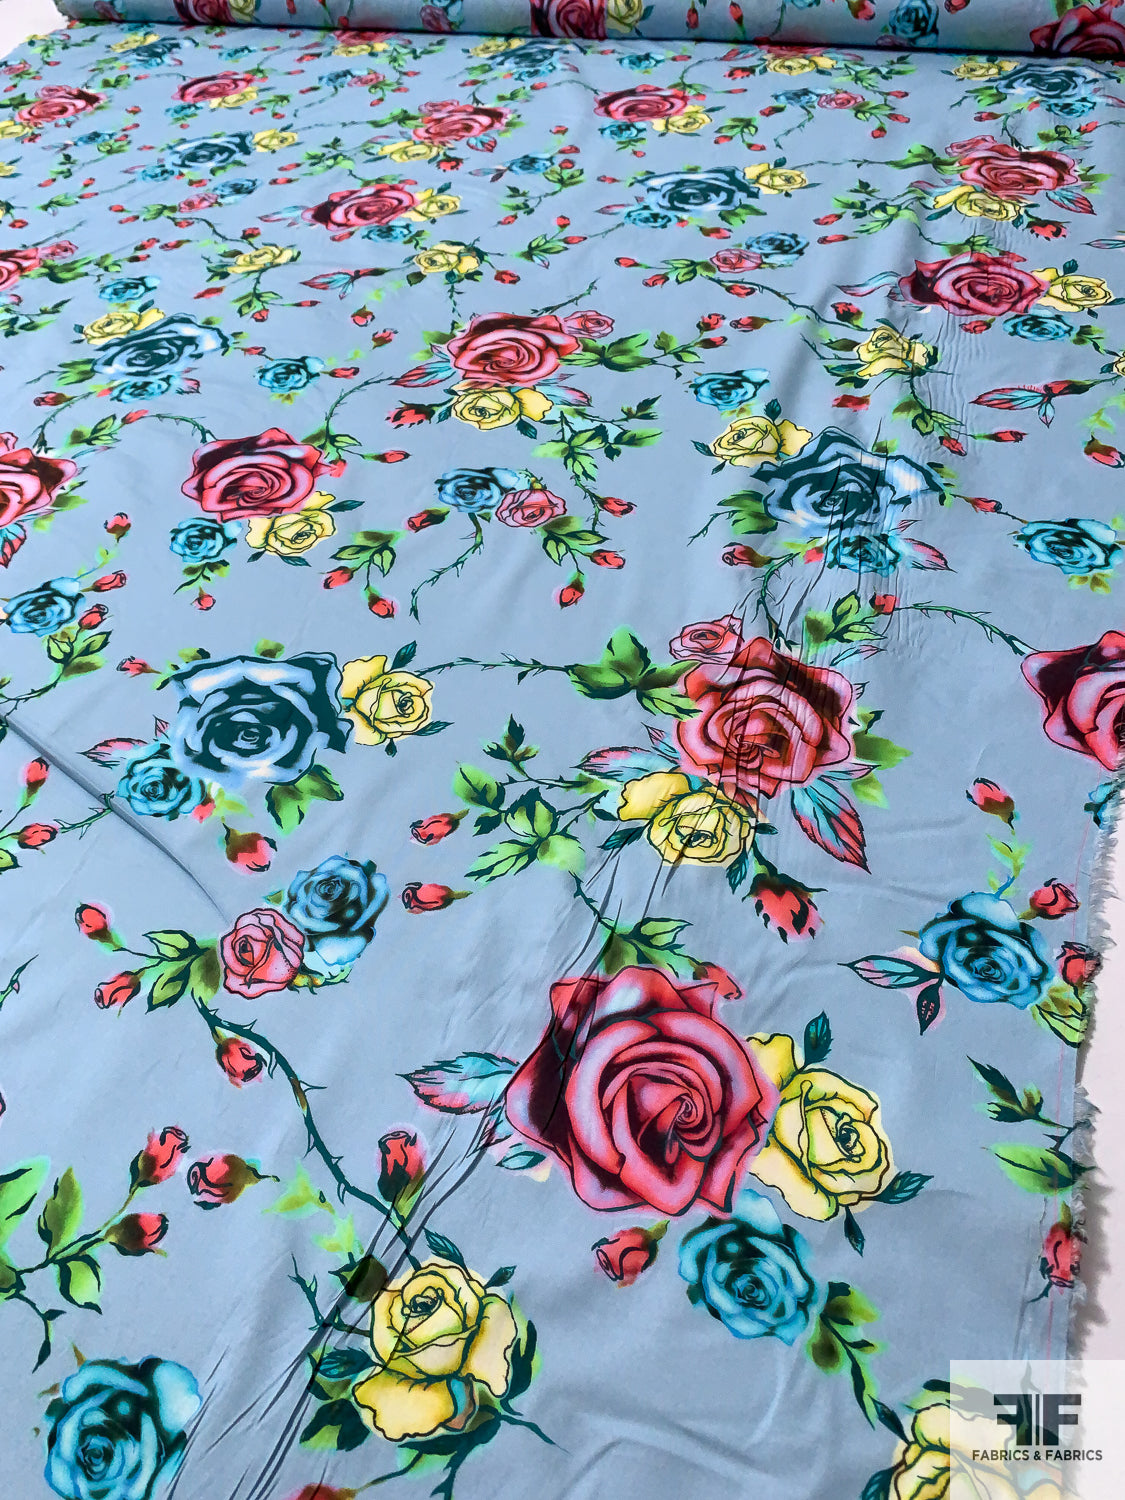 Italian Ditsy Floral Printed Cotton Lawn - Moss Green / Evergreen / Baby  Blue - Fabric by the Yard